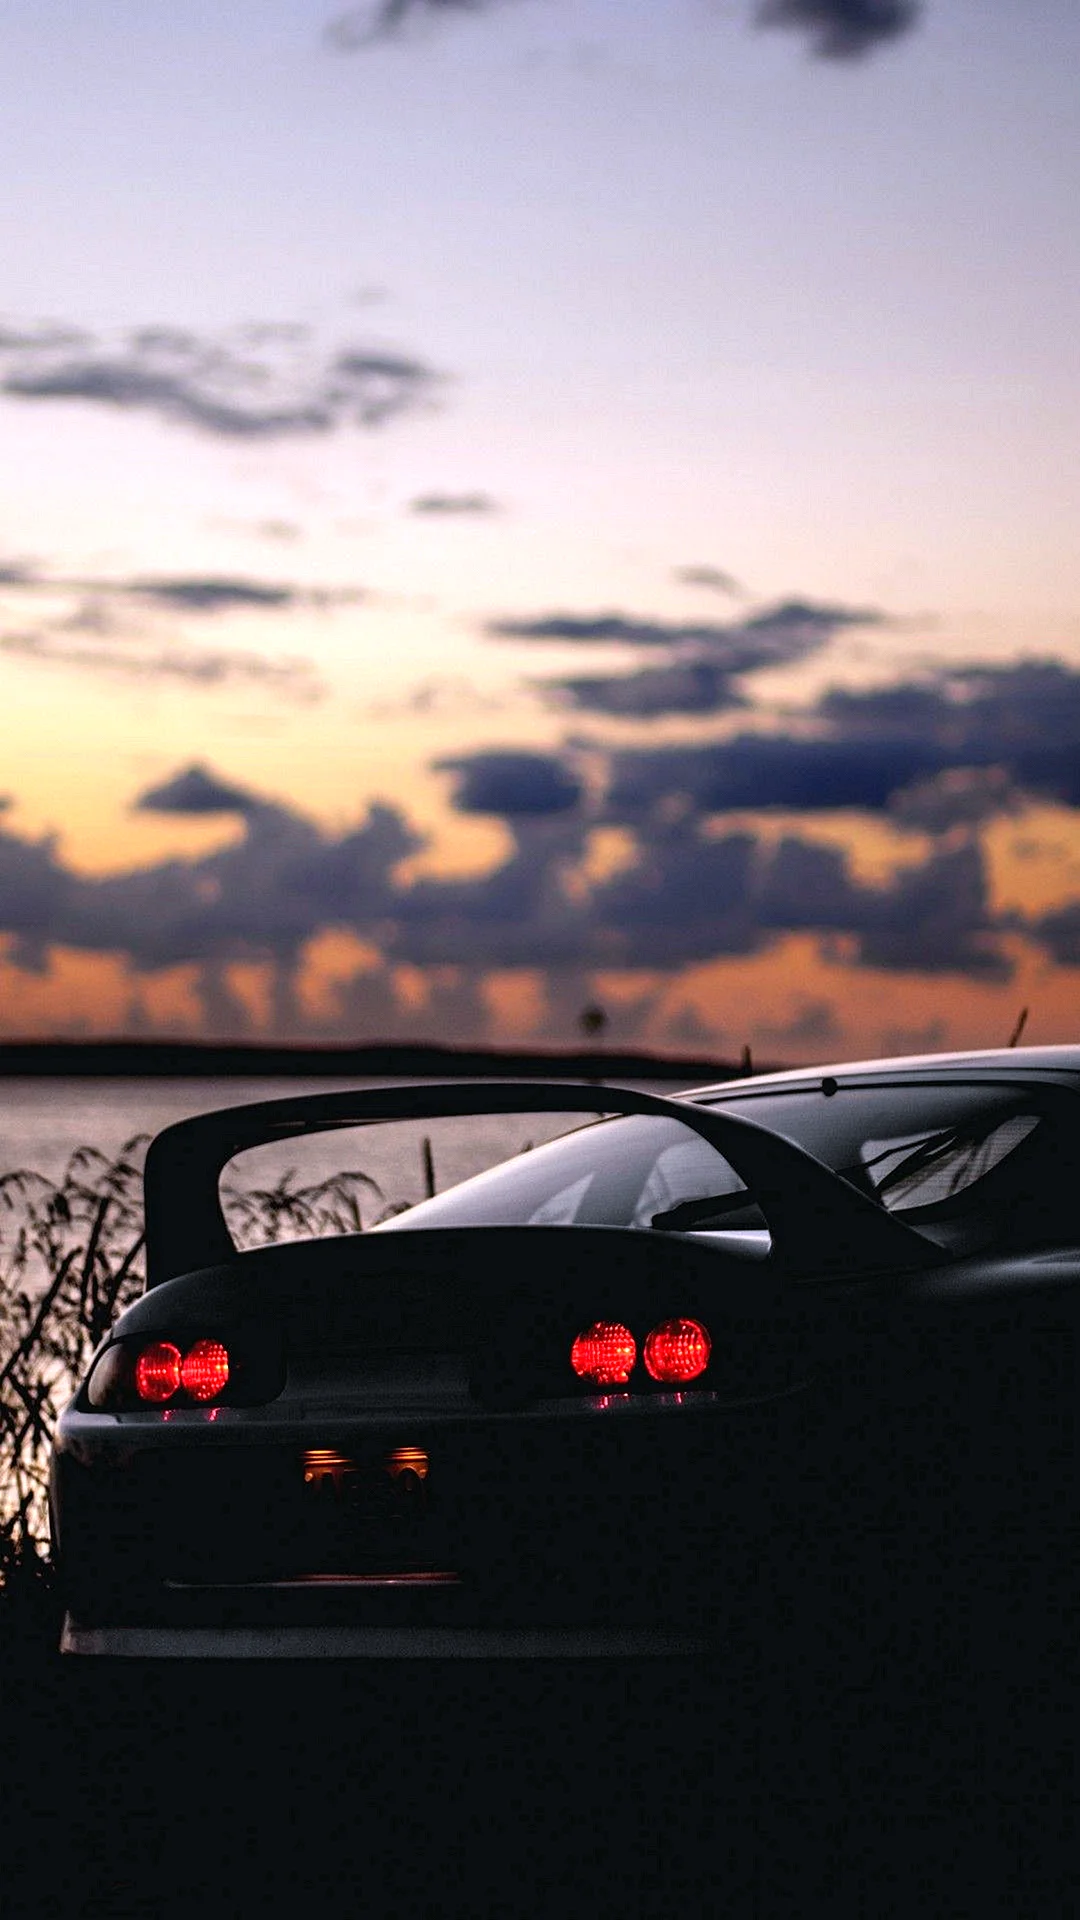 Toyota Supra 1920x1080 Wallpaper For iPhone